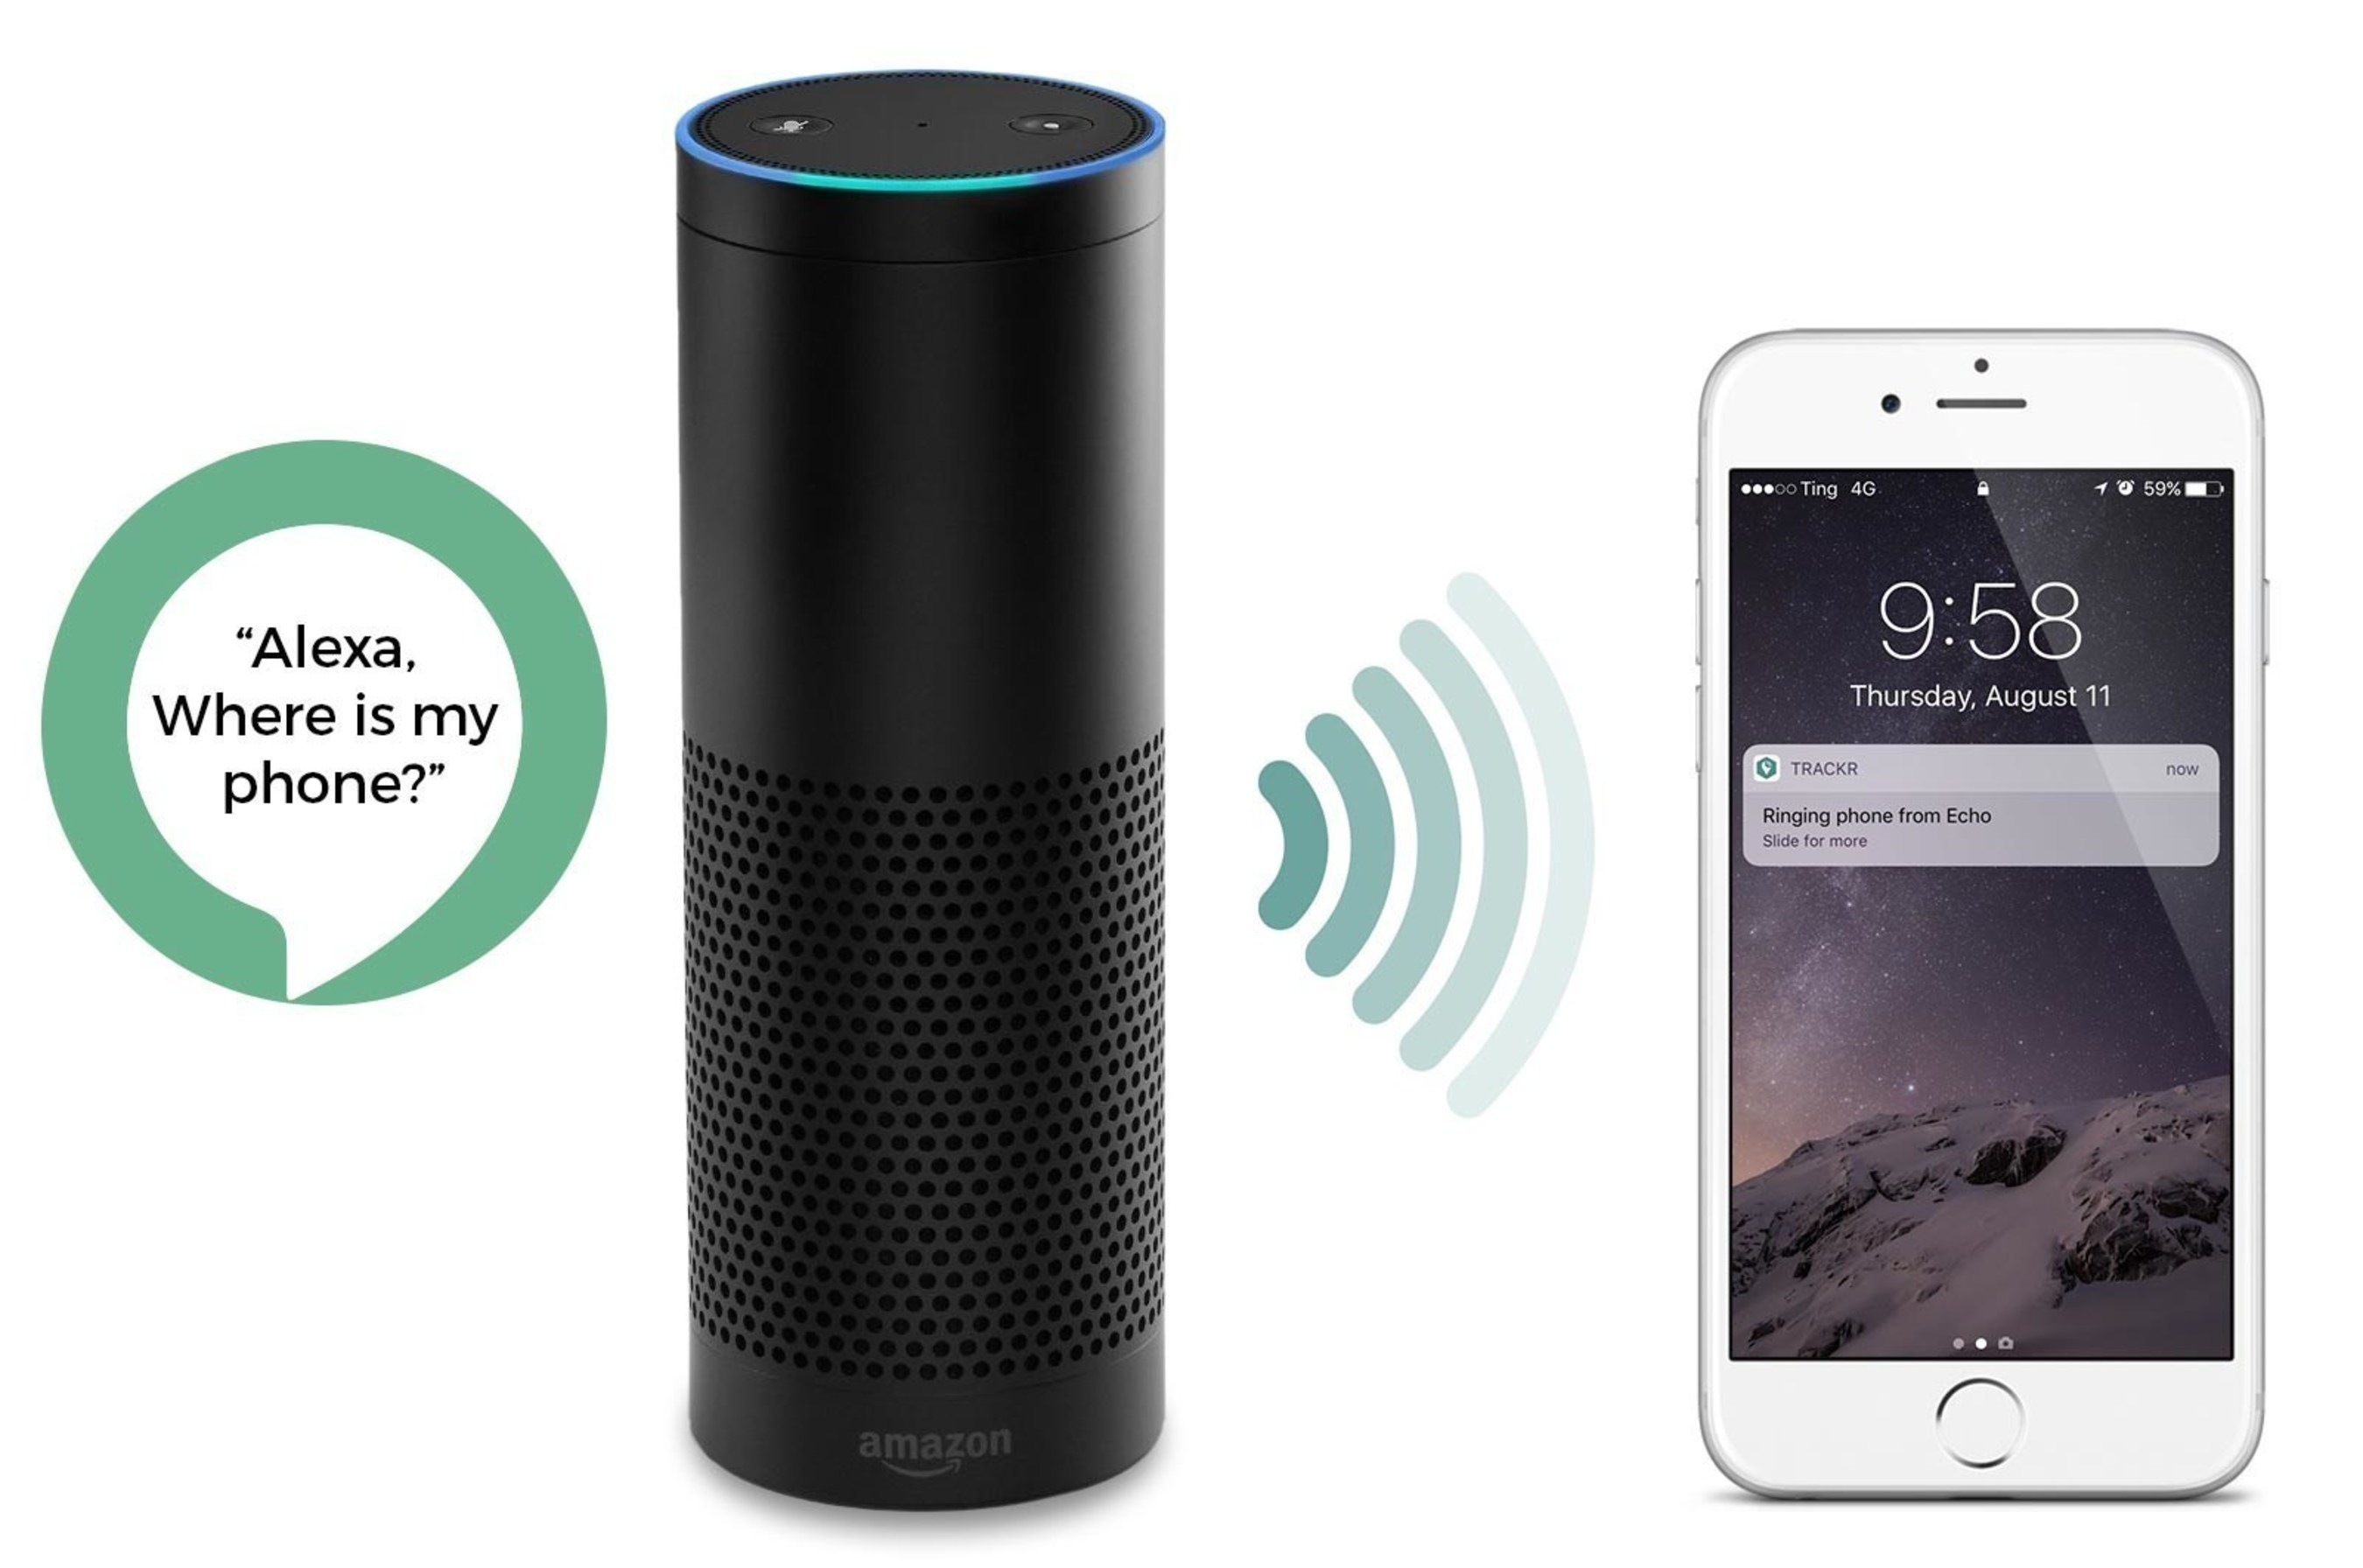 New TrackR Find My Phone skill for Amazon Alexa allows customers to locate a misplaced phone by simply saying, "Alexa, ask TrackR to find my phone."